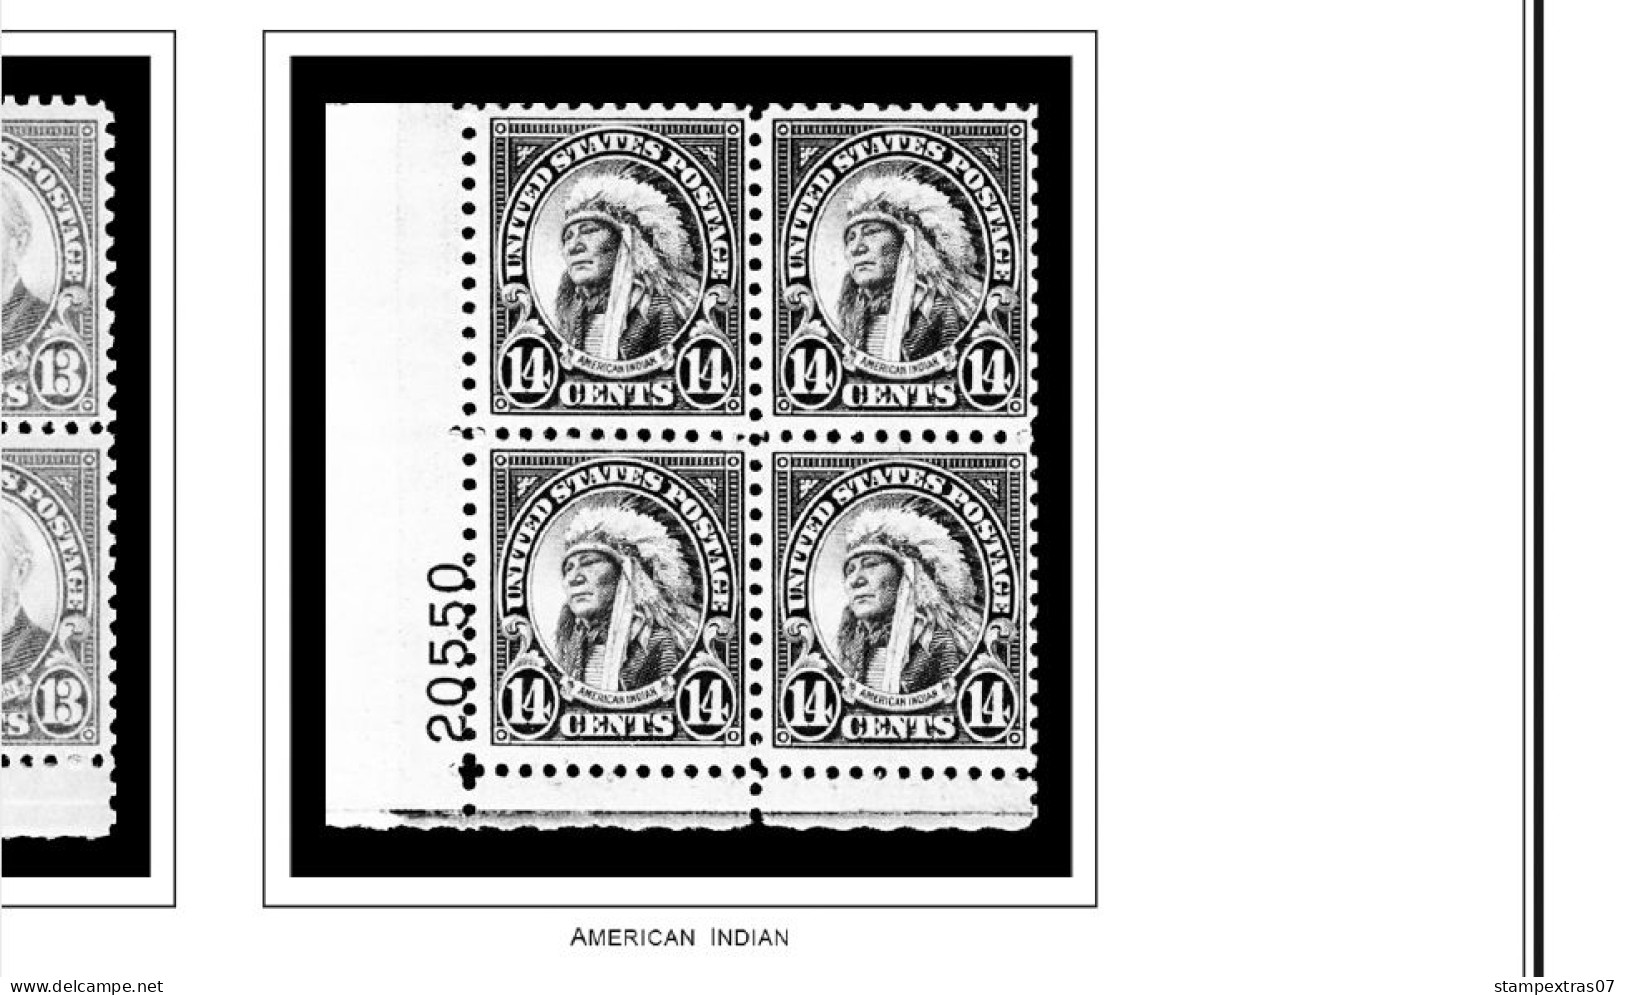 US 1930-1939 PLATE BLOCKS STAMP ALBUM PAGES (47 B&w Illustrated Pages) - Englisch